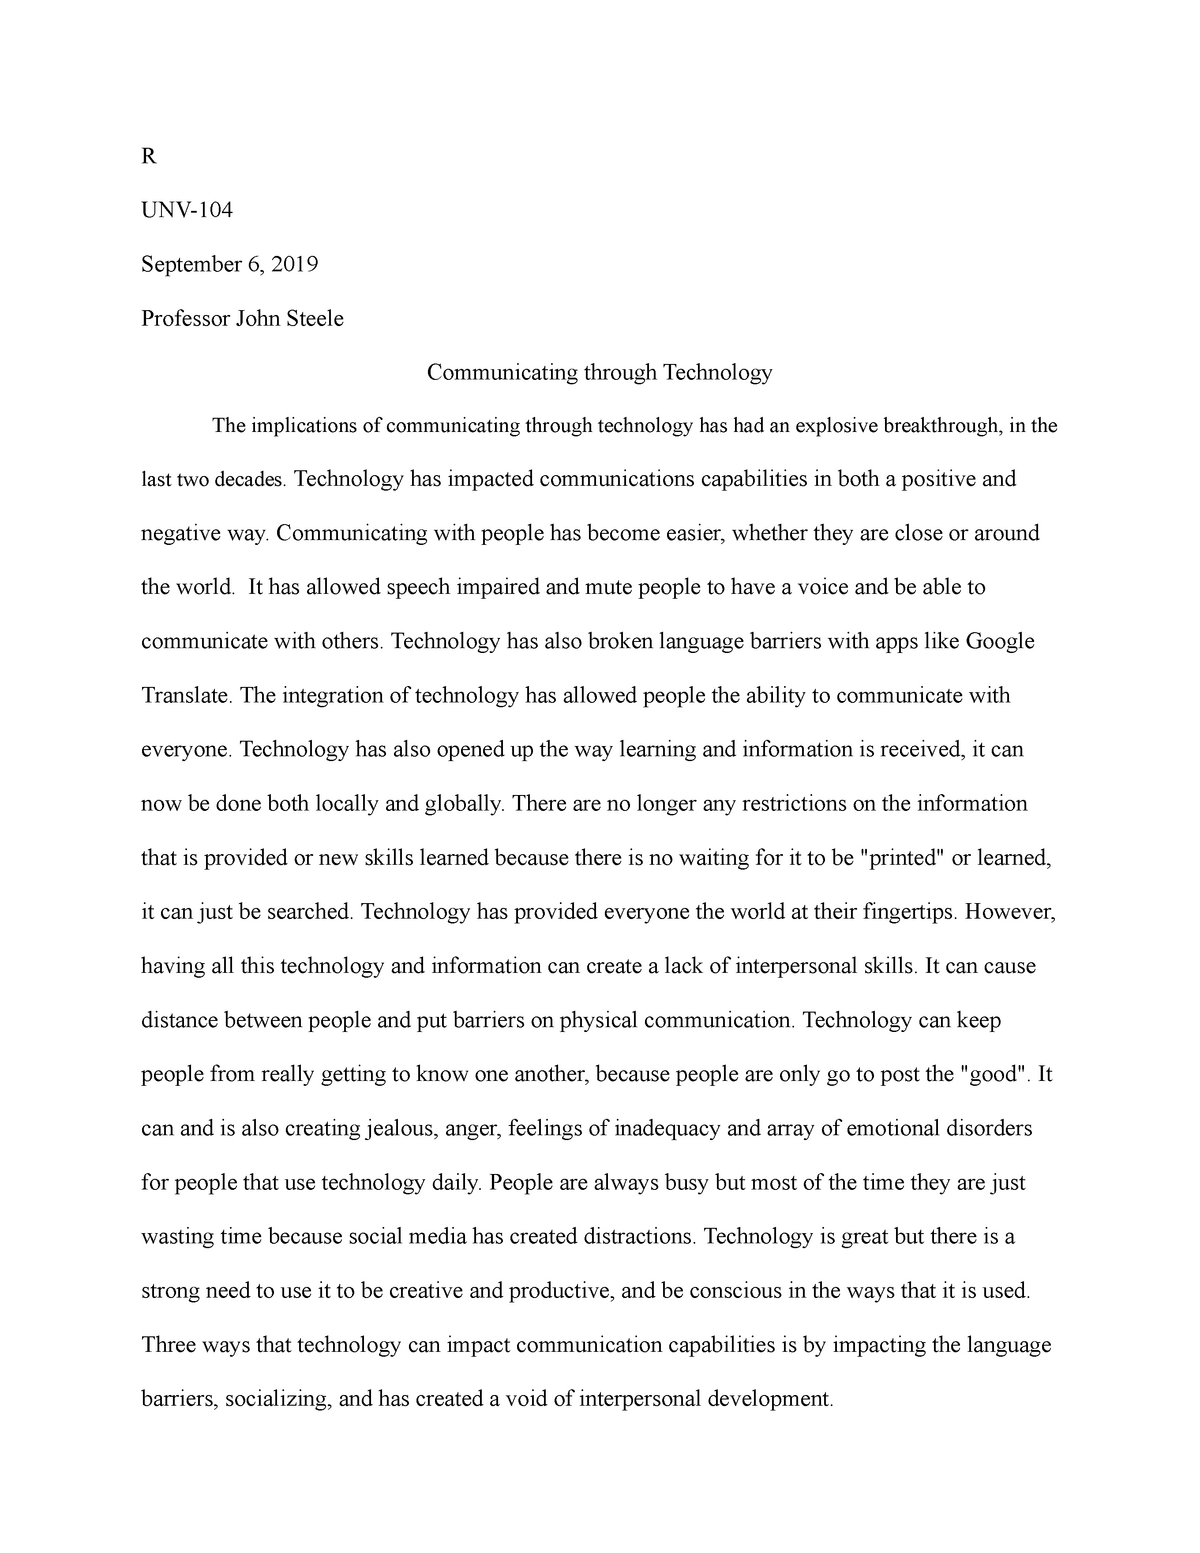 unv 104 expository essay outline